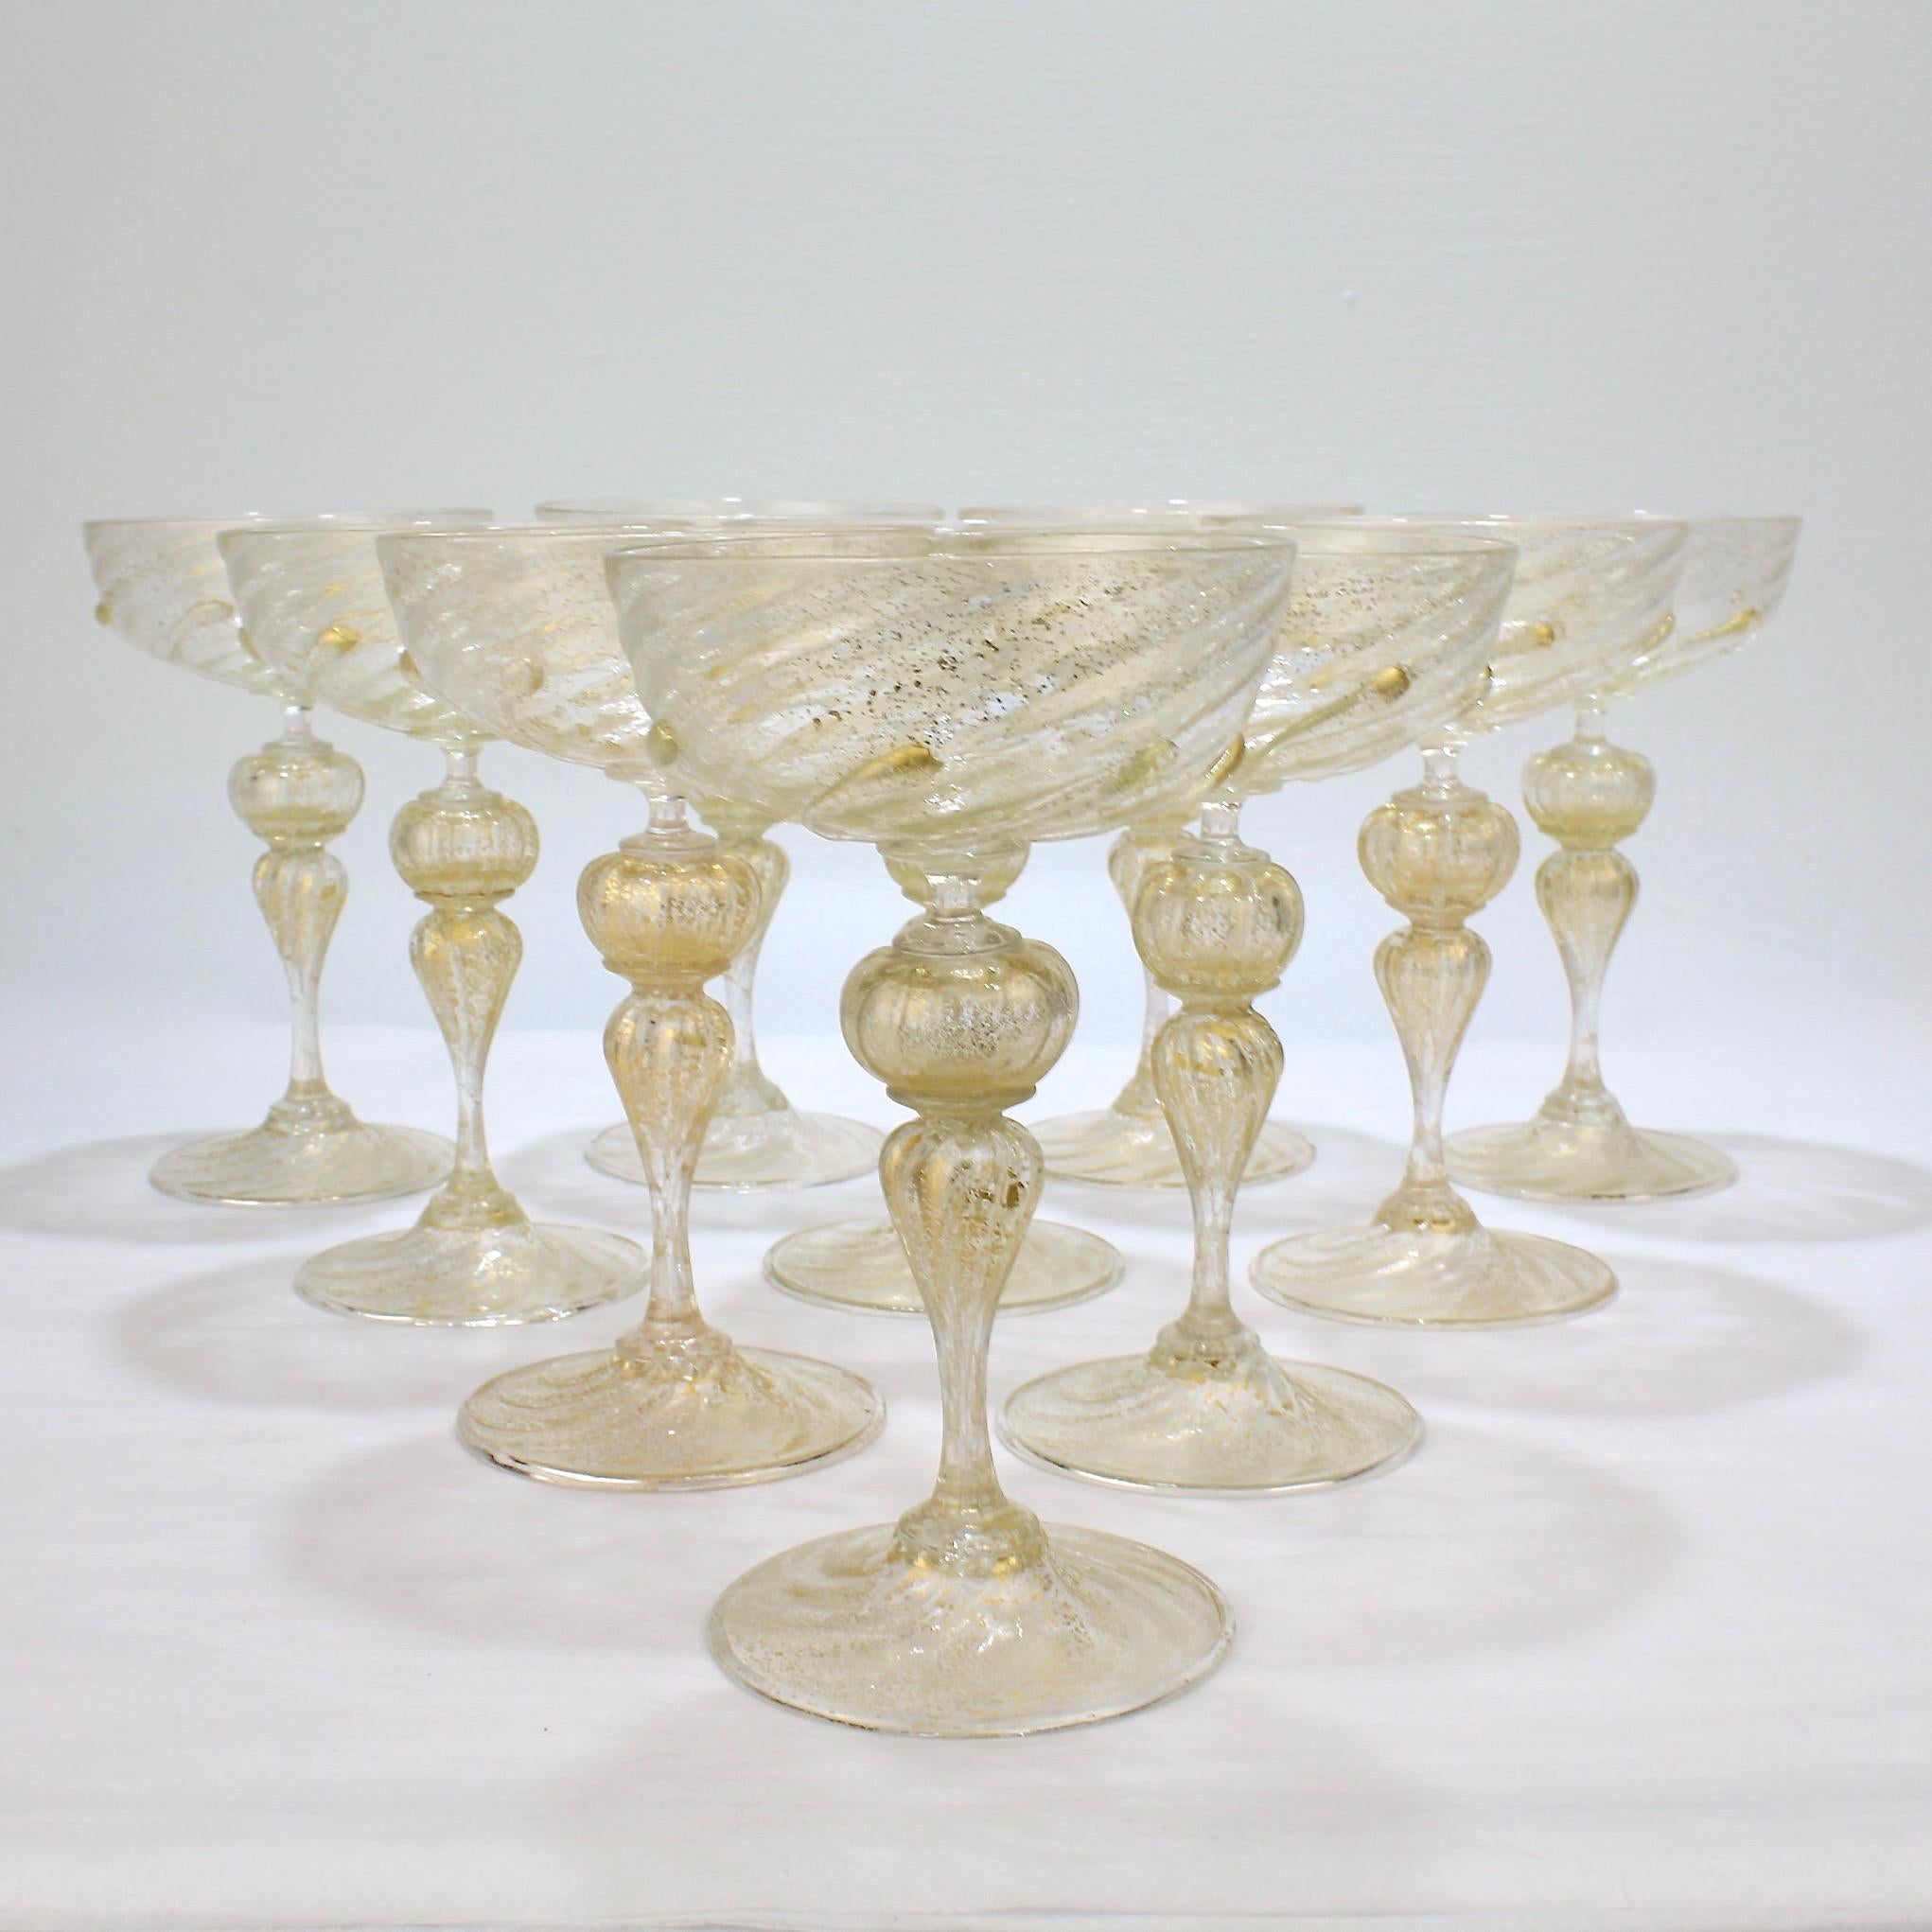 A vintage set of 10 Venetian or Murano glass champagne coupes.

Attributed to Salviati.

Finely worked with applied swirled prunts to the base of the cups and gold inclusions throughout.

A great form and of the finest quality.

Measure: